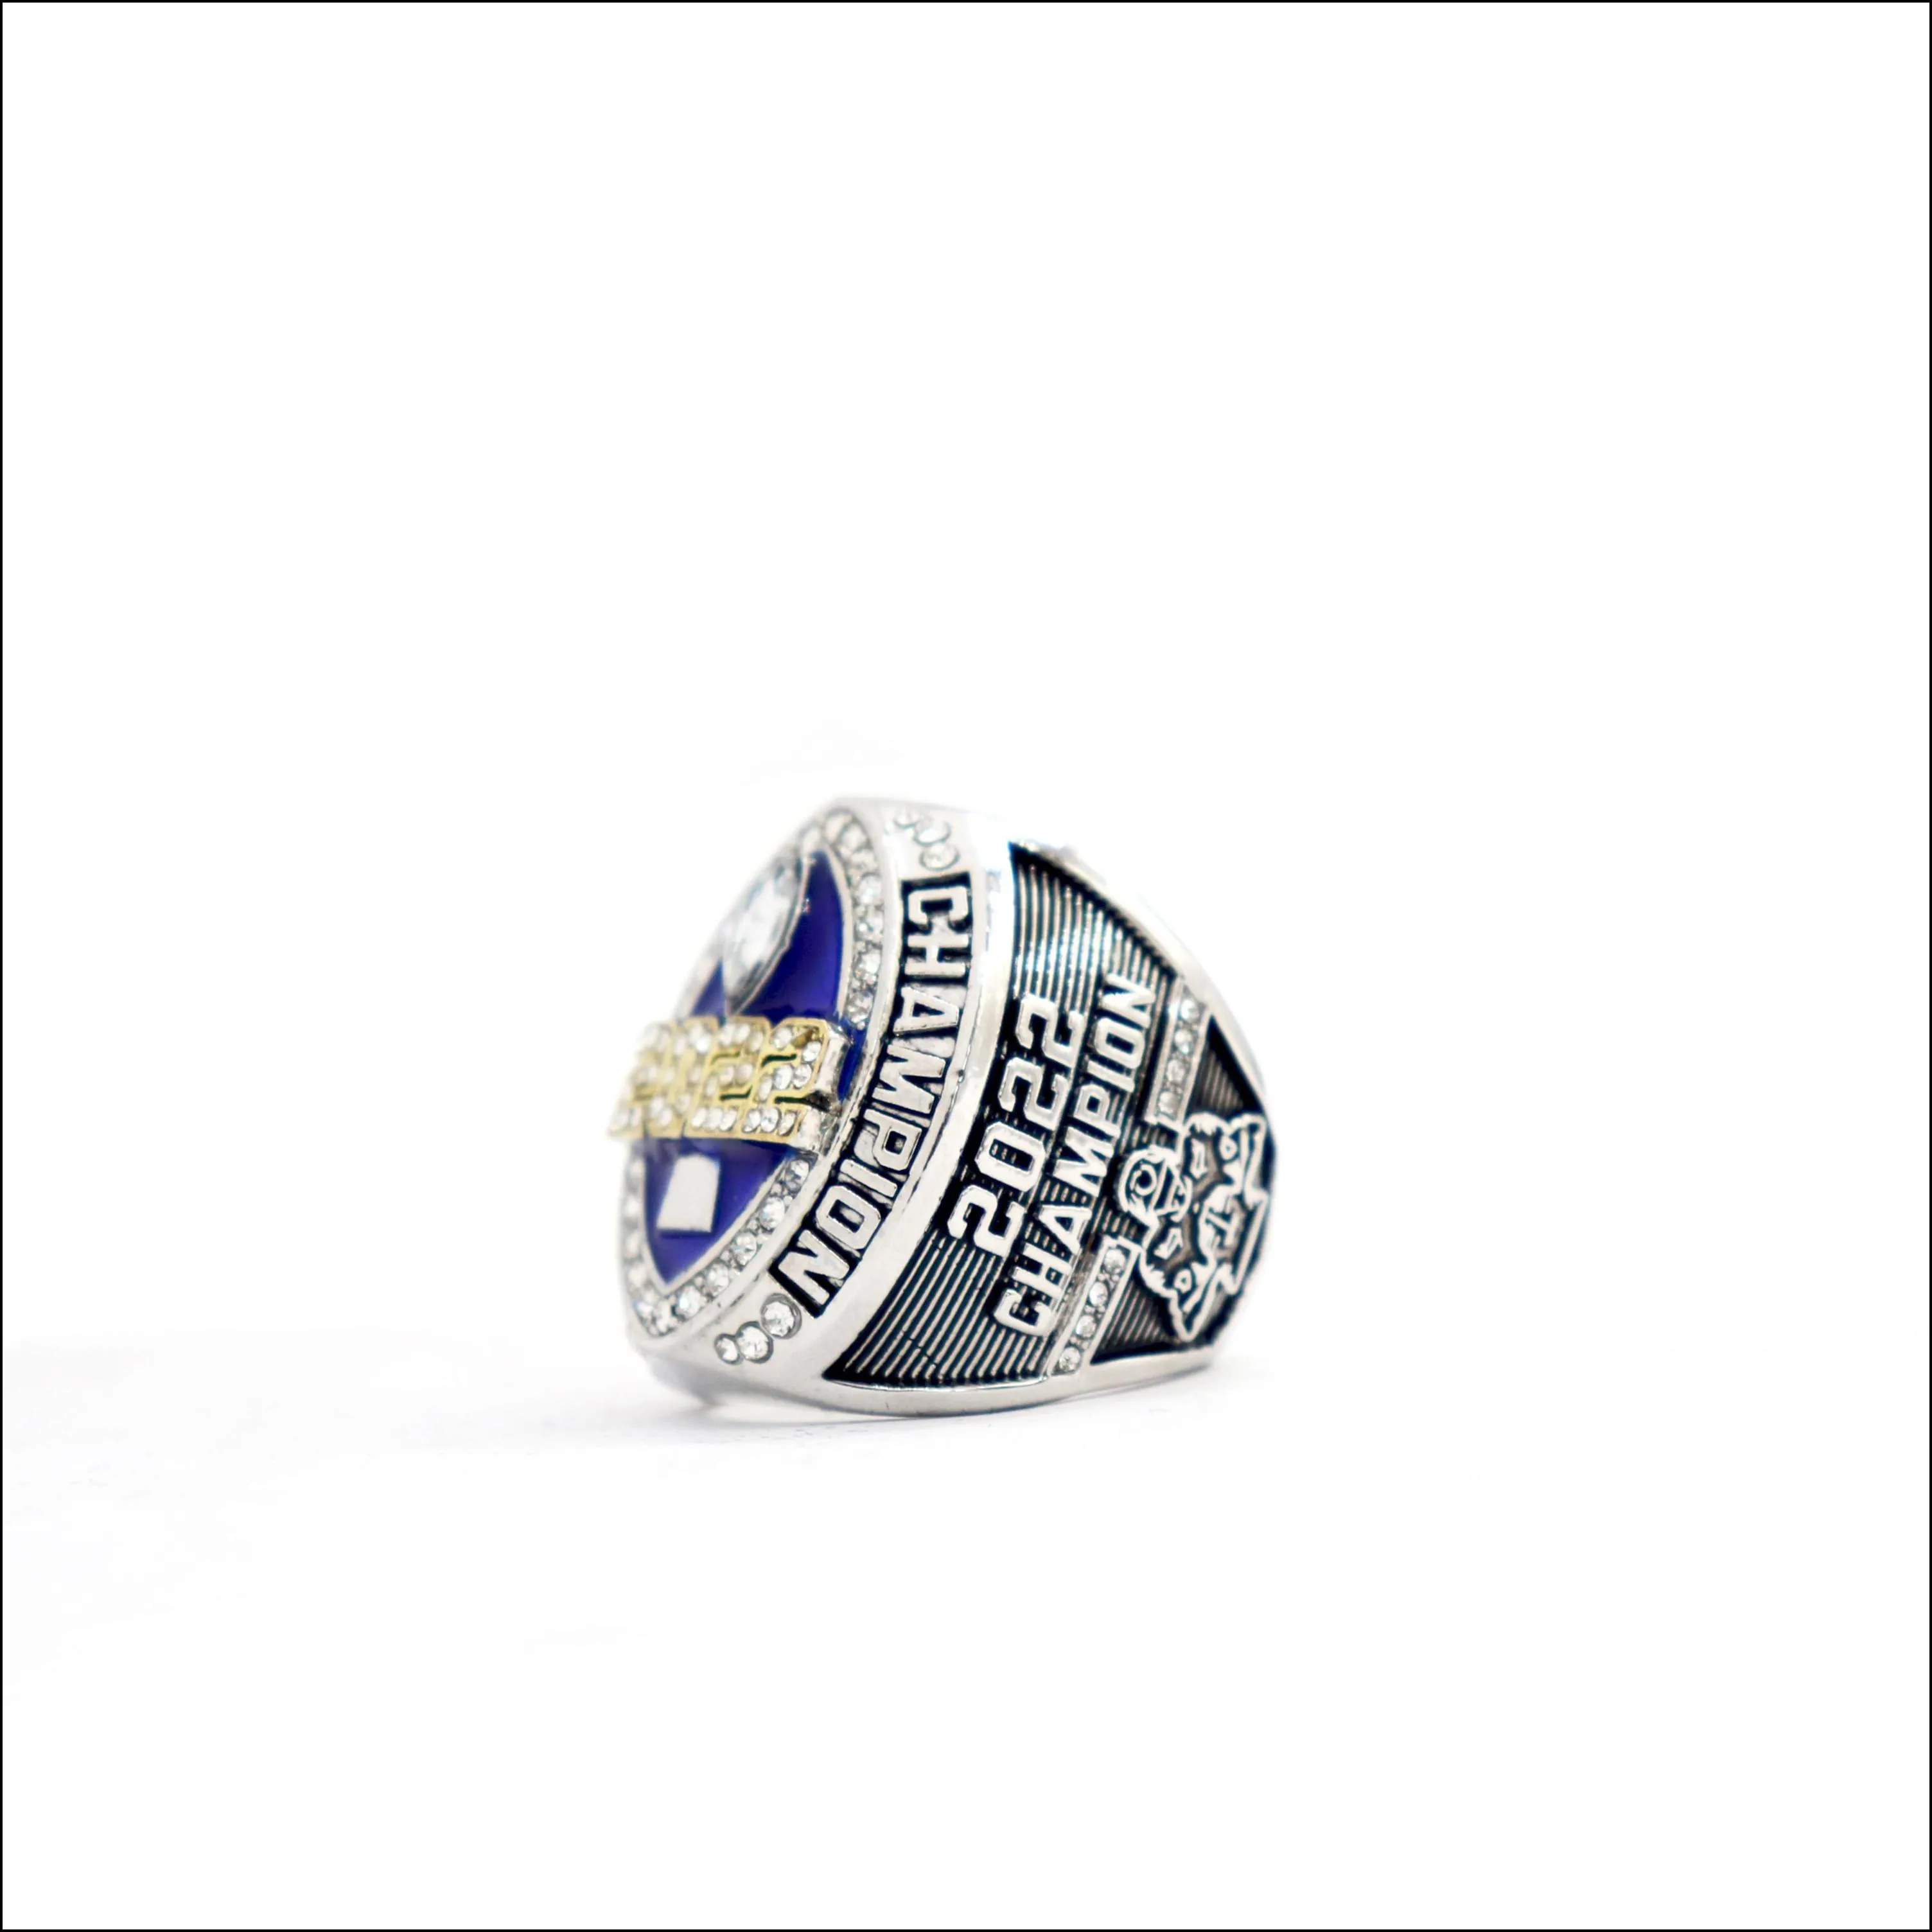 hot sales 2022 blues style fantasy football championship rings full size 8-14